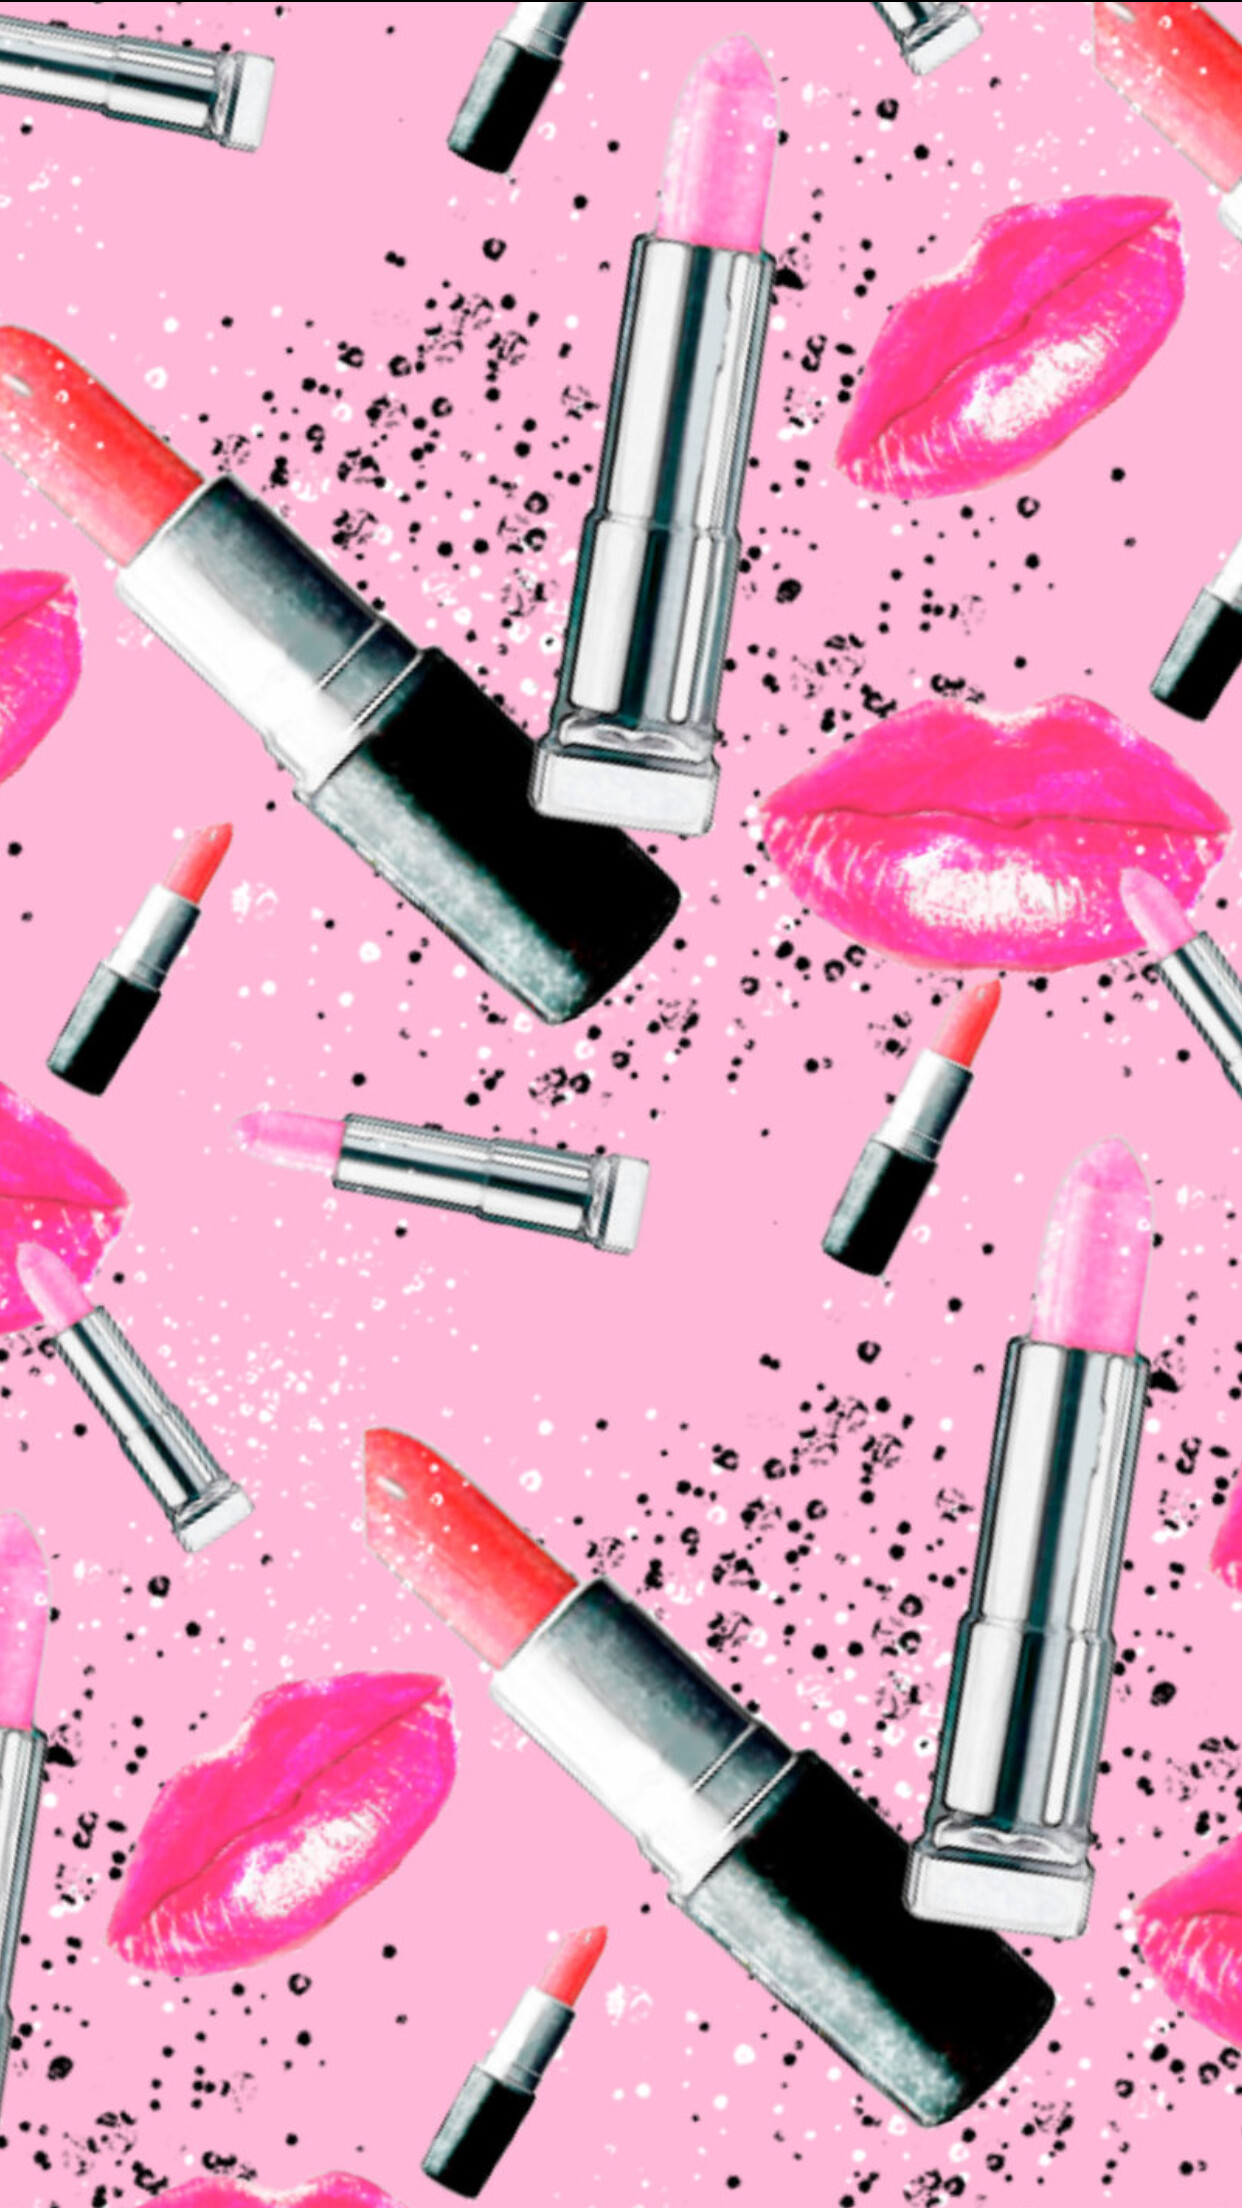 Lipstick: Pink lipsticks with shimmering effects in tubes, Lip makeup, Substance that is put on the lips. 1250x2210 HD Wallpaper.